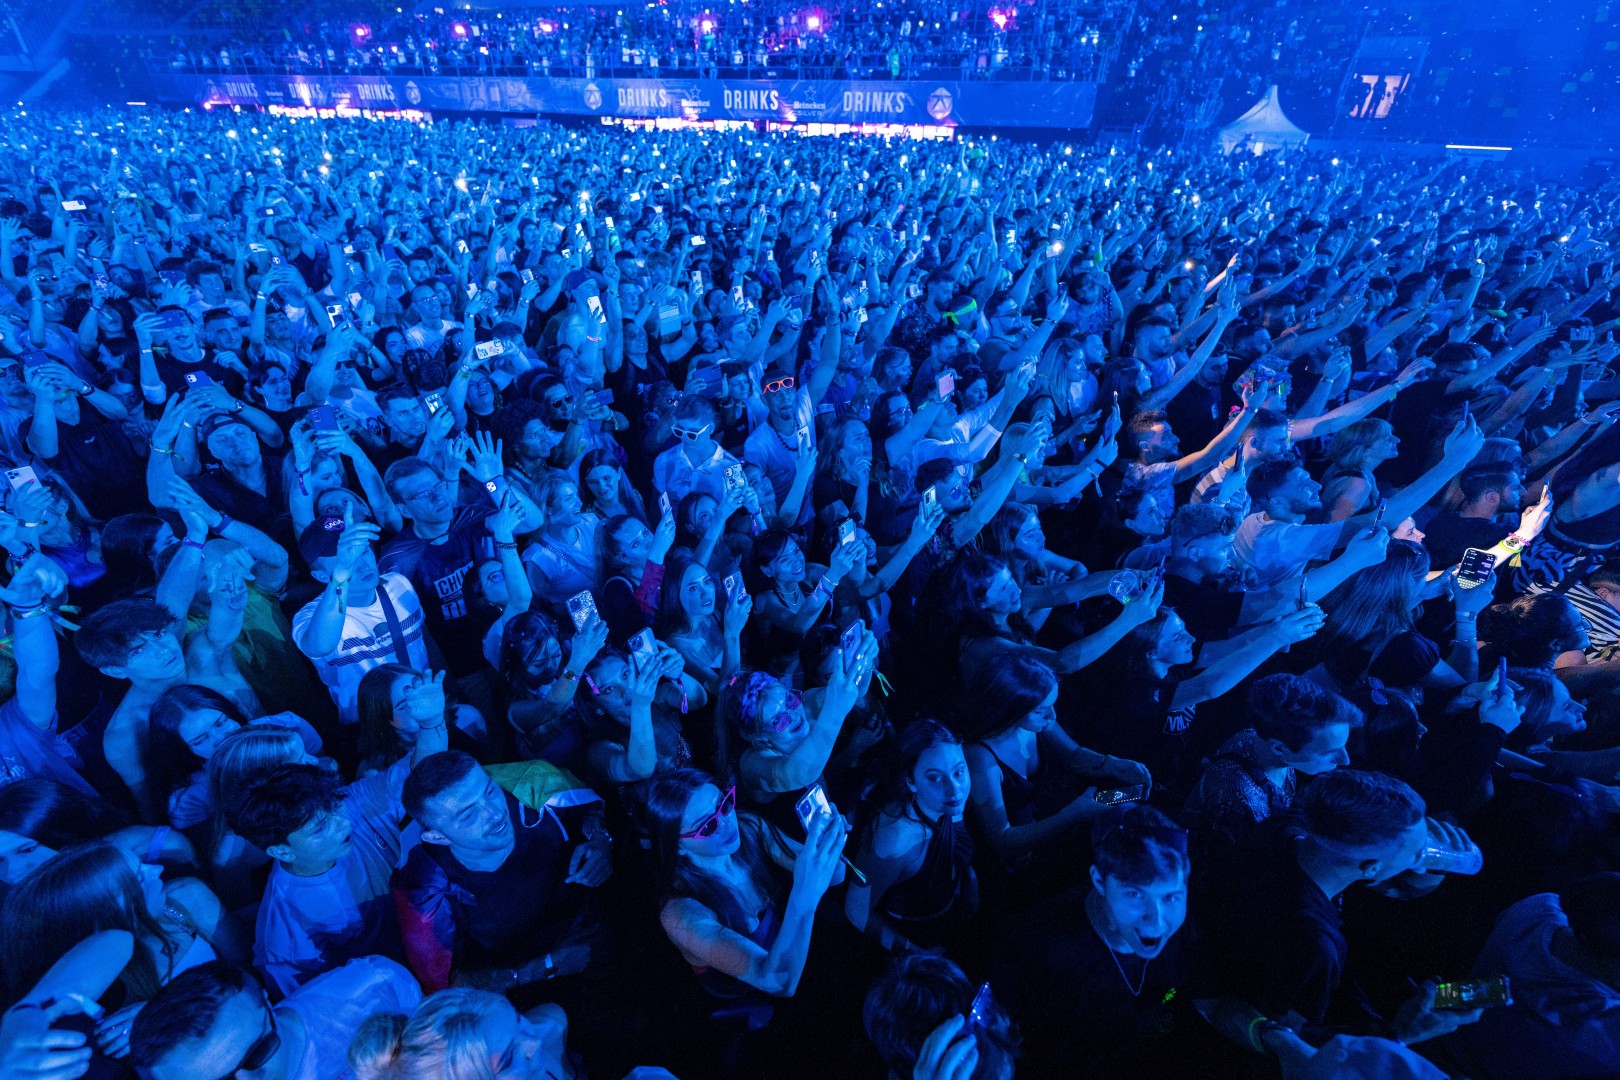 Public at National Arena in Bucharest on June 5, 2022 (db5507f2df)